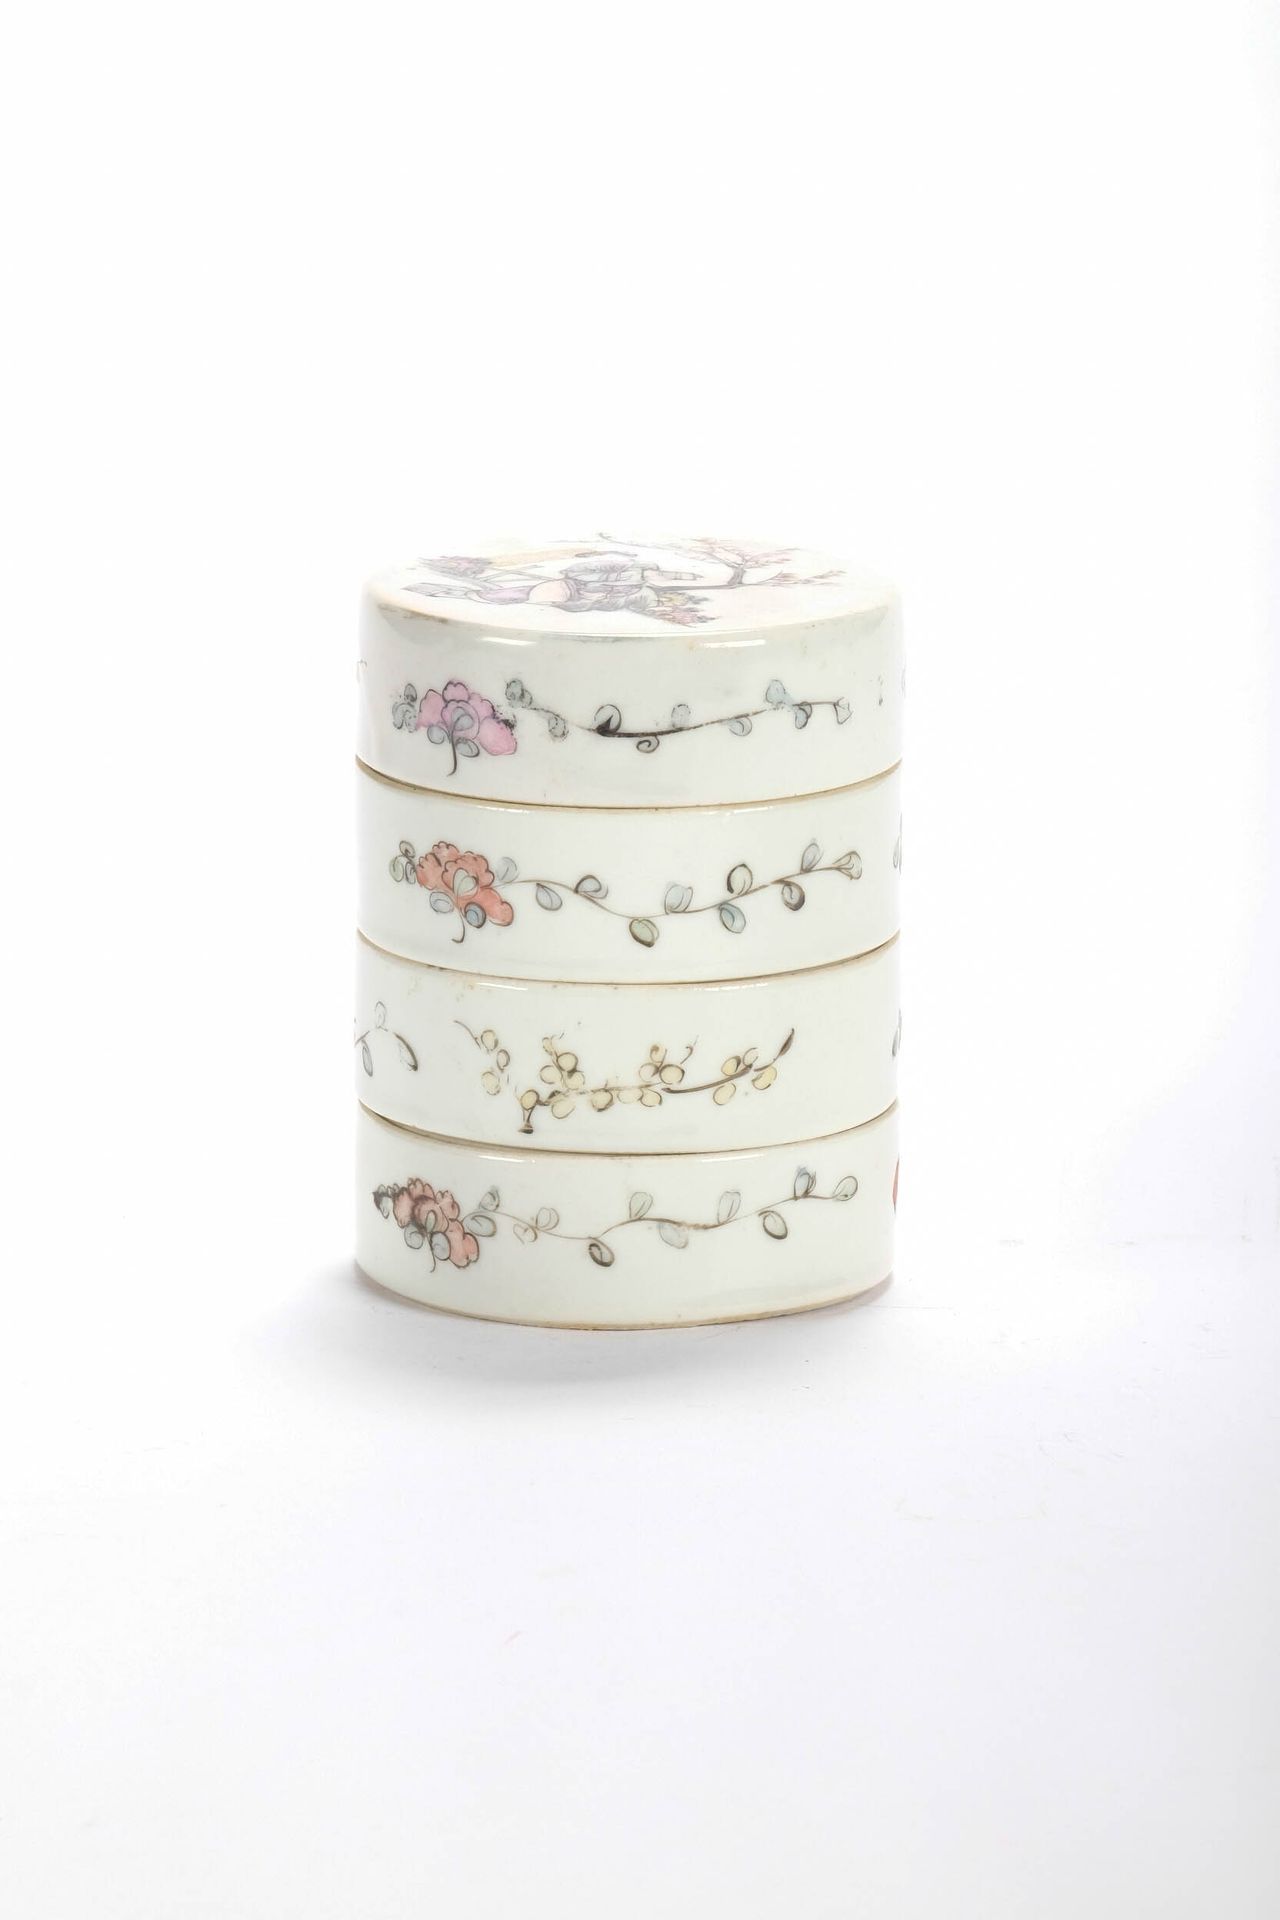 CHINE (CHINA, 中国) Porcelain pot with 4 compartments. H 11 cm D 8 cm. XIX (2 smal&hellip;